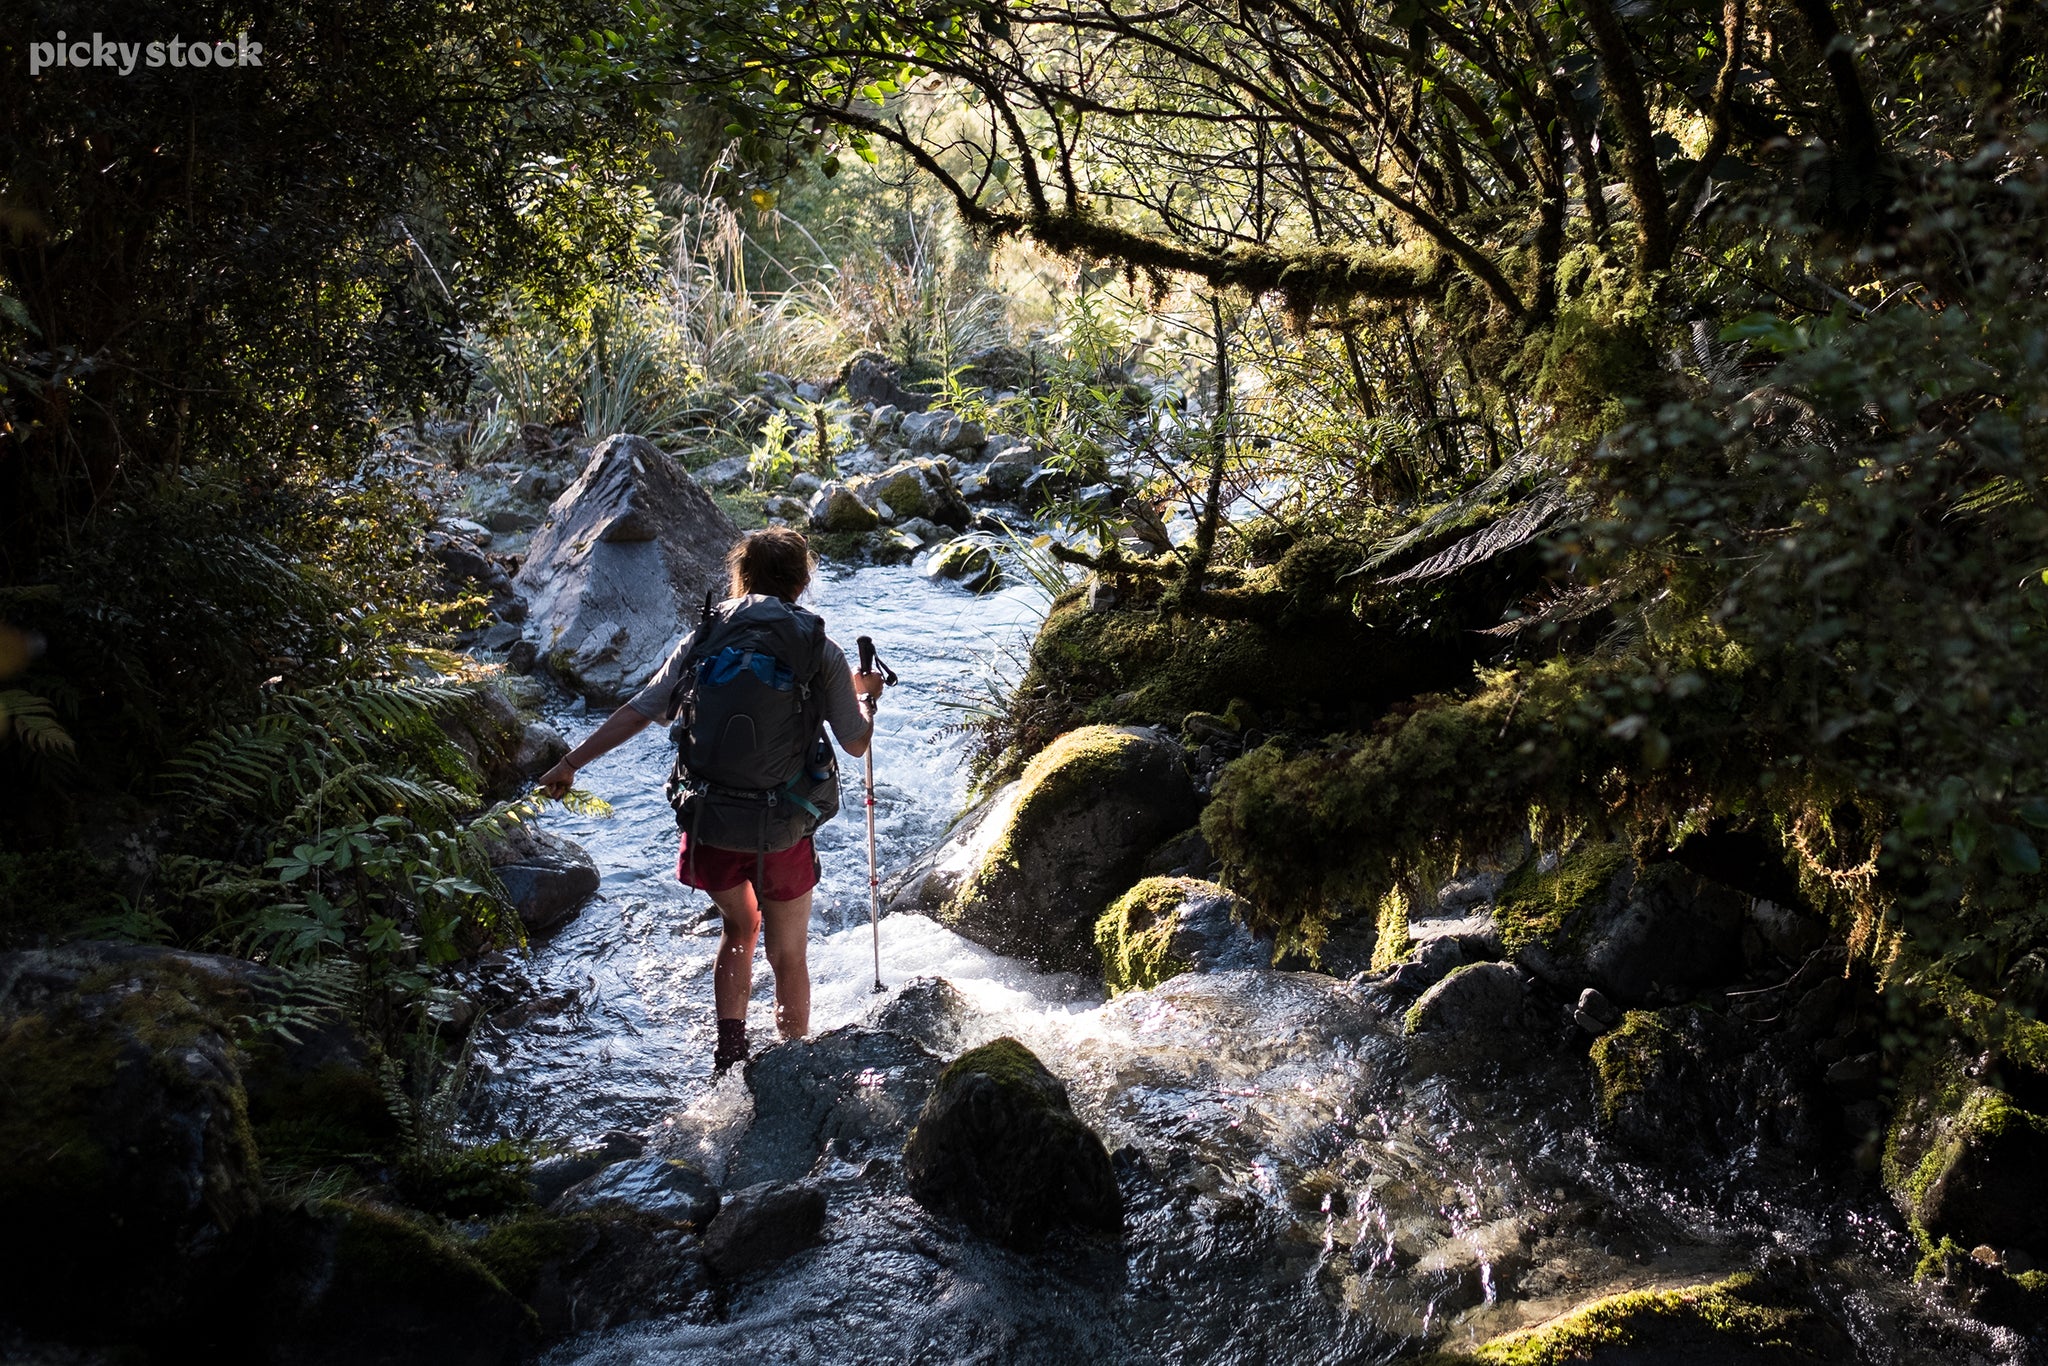 Landscape of a person in hiking gear walks down a stream surrounded by timeless and primordial forest, the sunlight gleams of the water, and mossy branches. The hikers hold knot a branch to stabilize themself.